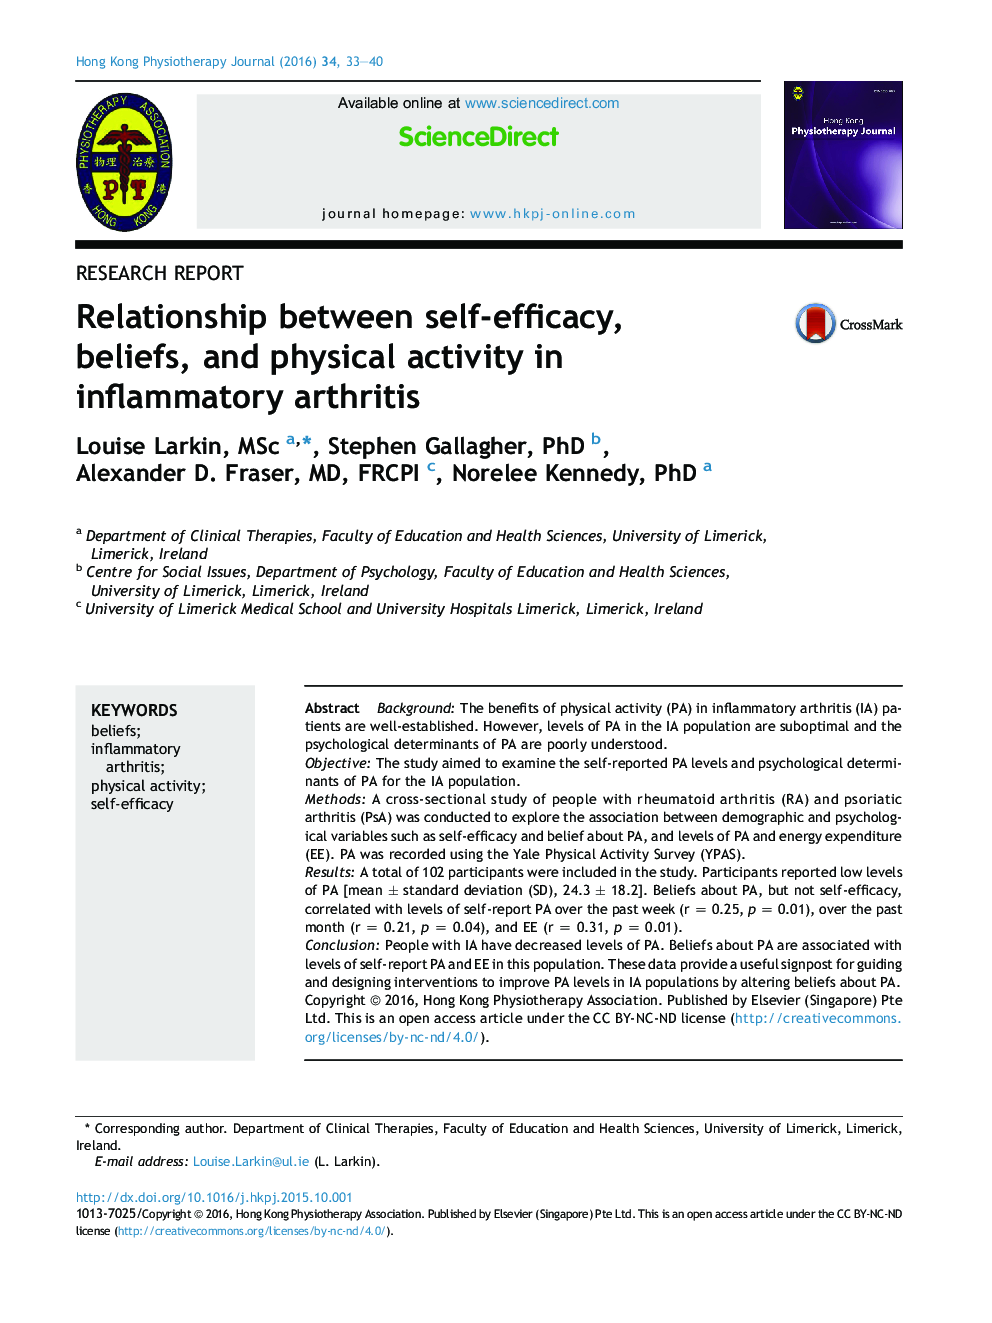 Relationship between self-efficacy, beliefs, and physical activity in inflammatory arthritis